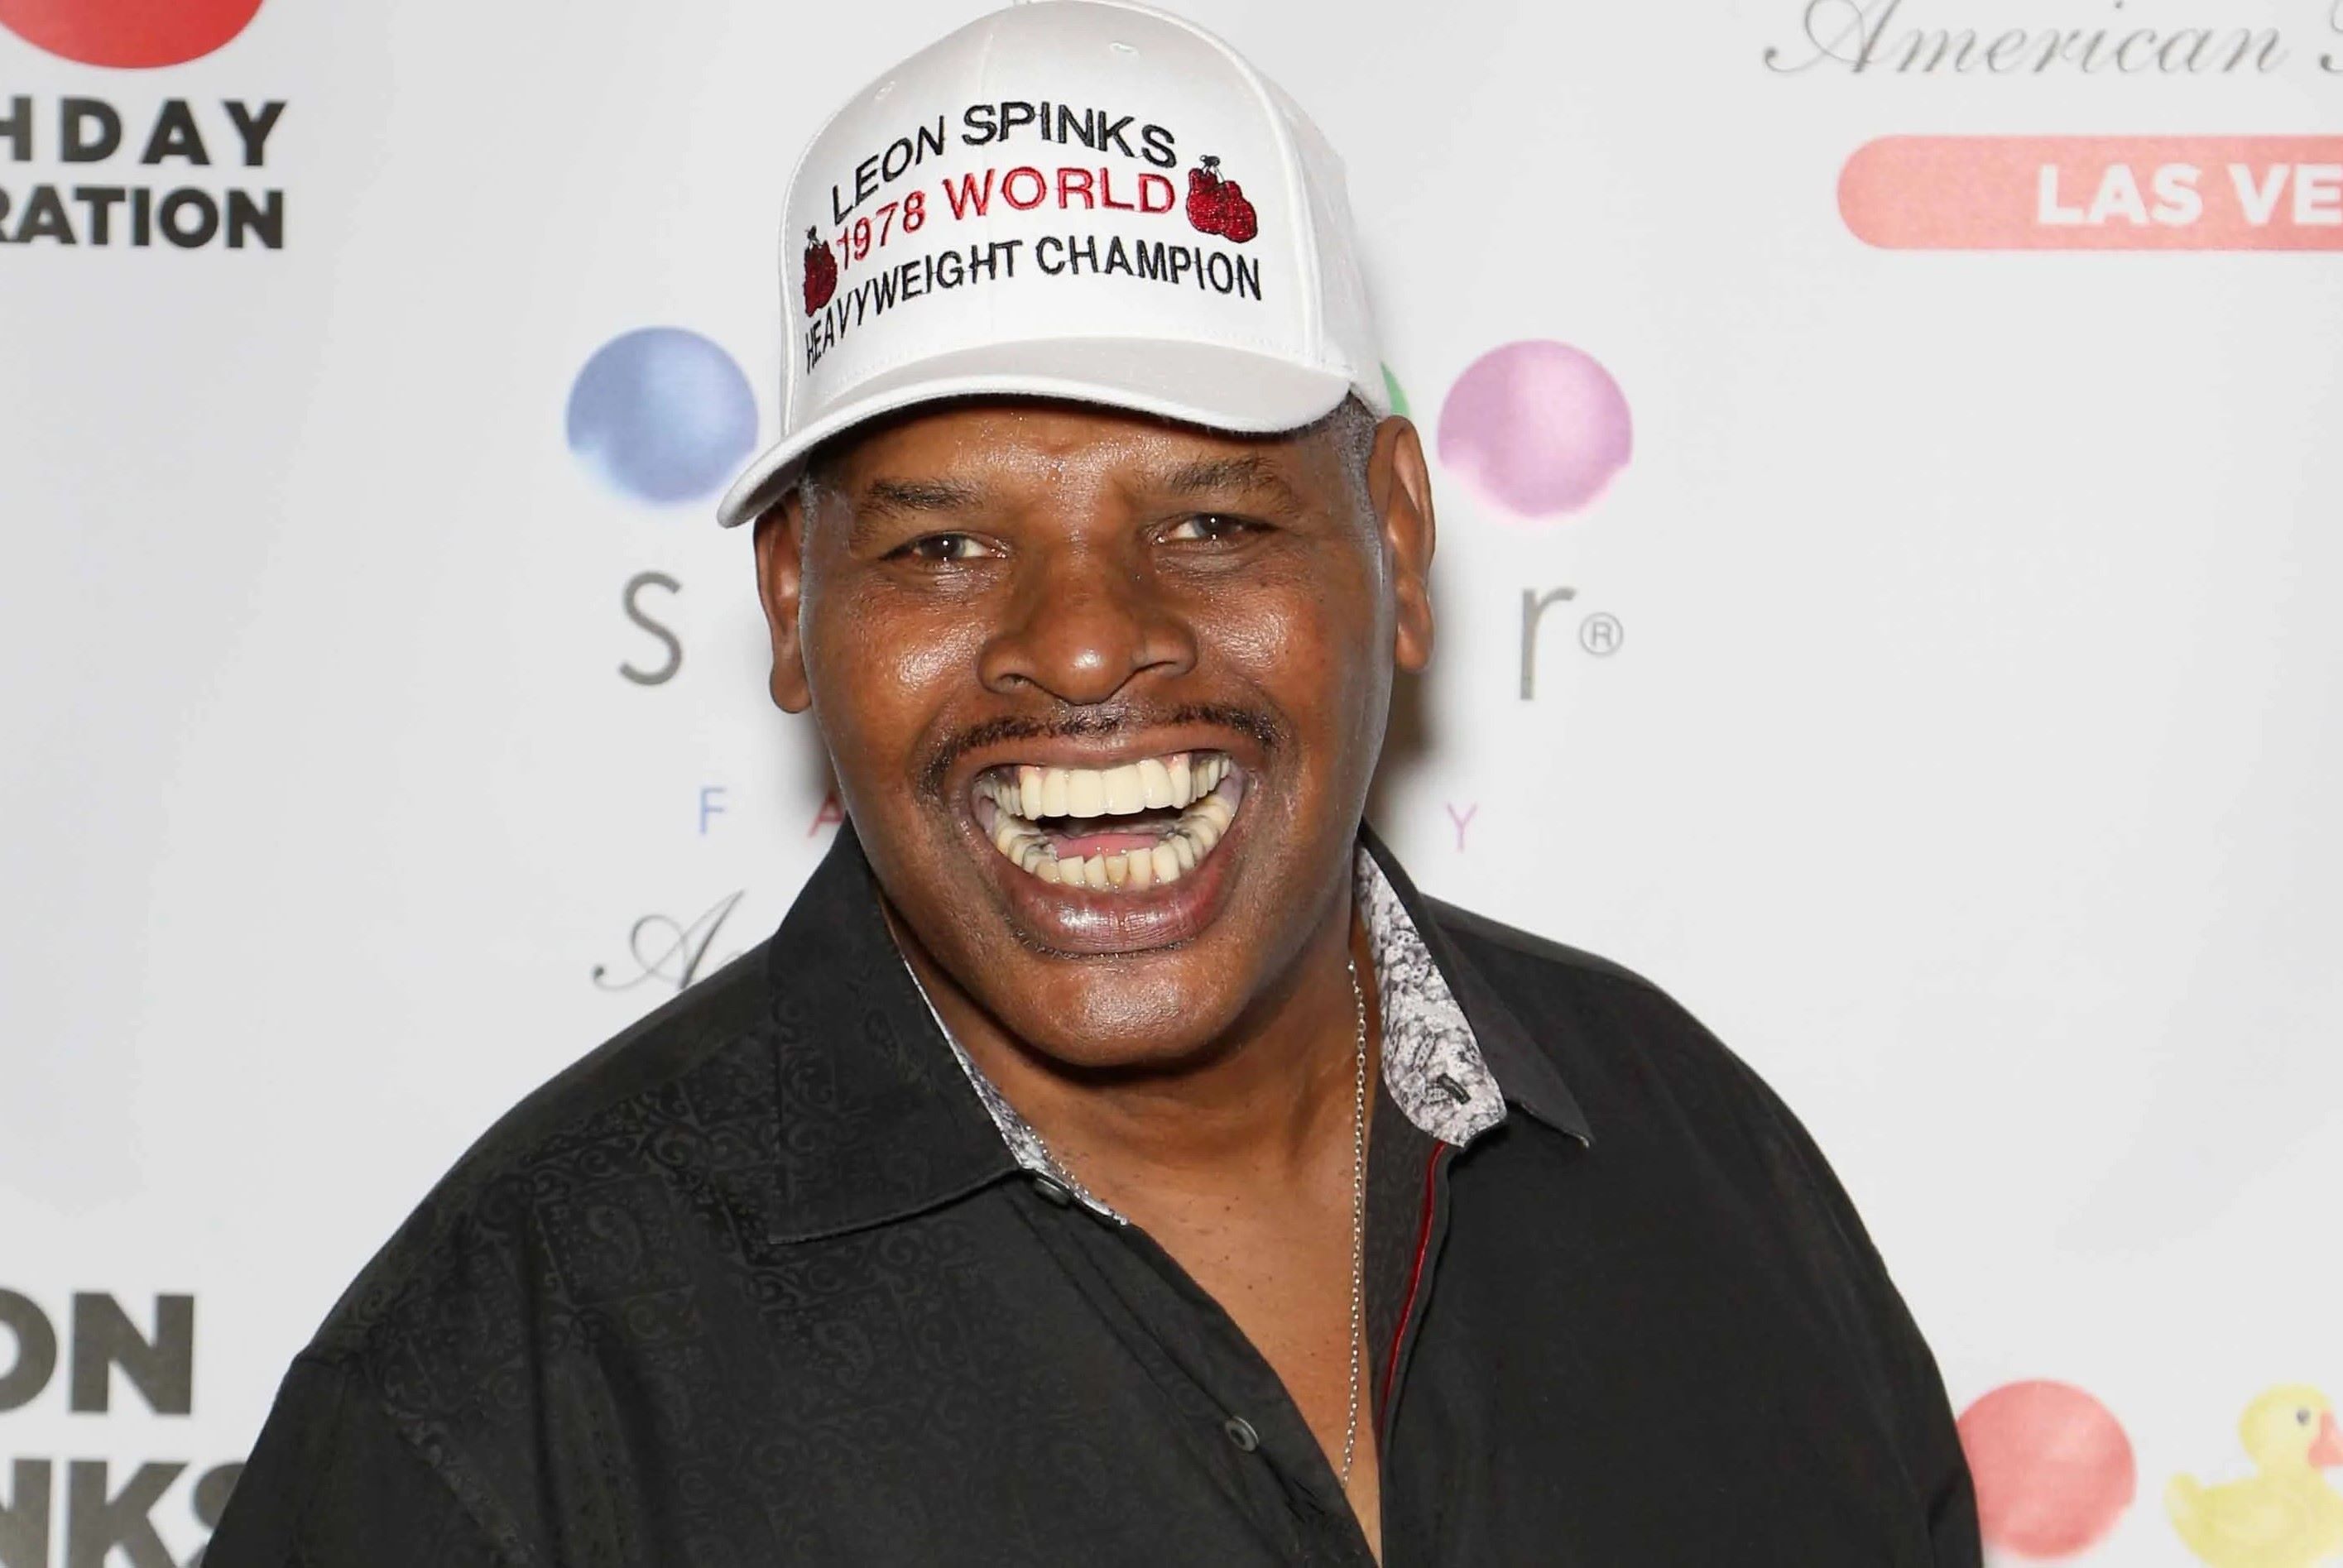 23-astounding-facts-about-leon-spinks